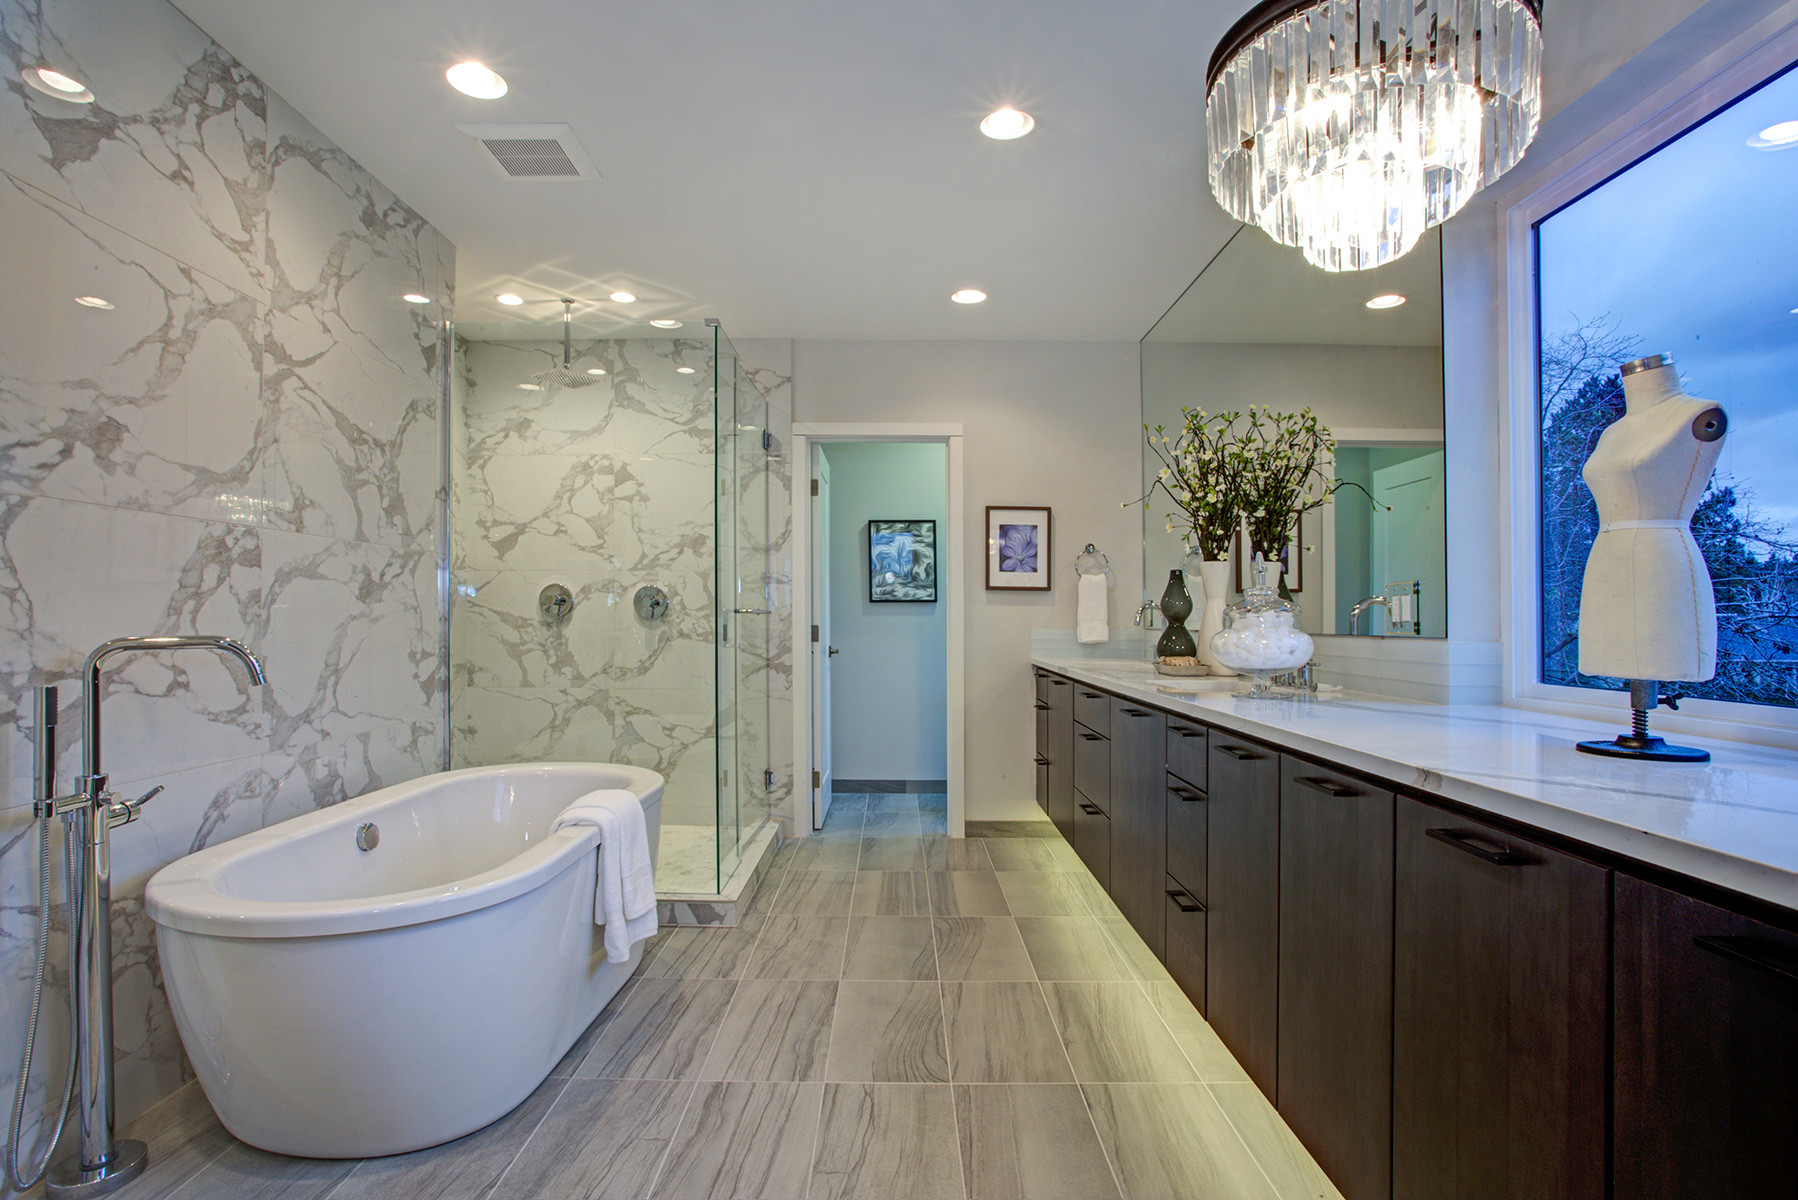 New Bathroom Designs
 Design Trends Bubbling Up in New Bathrooms